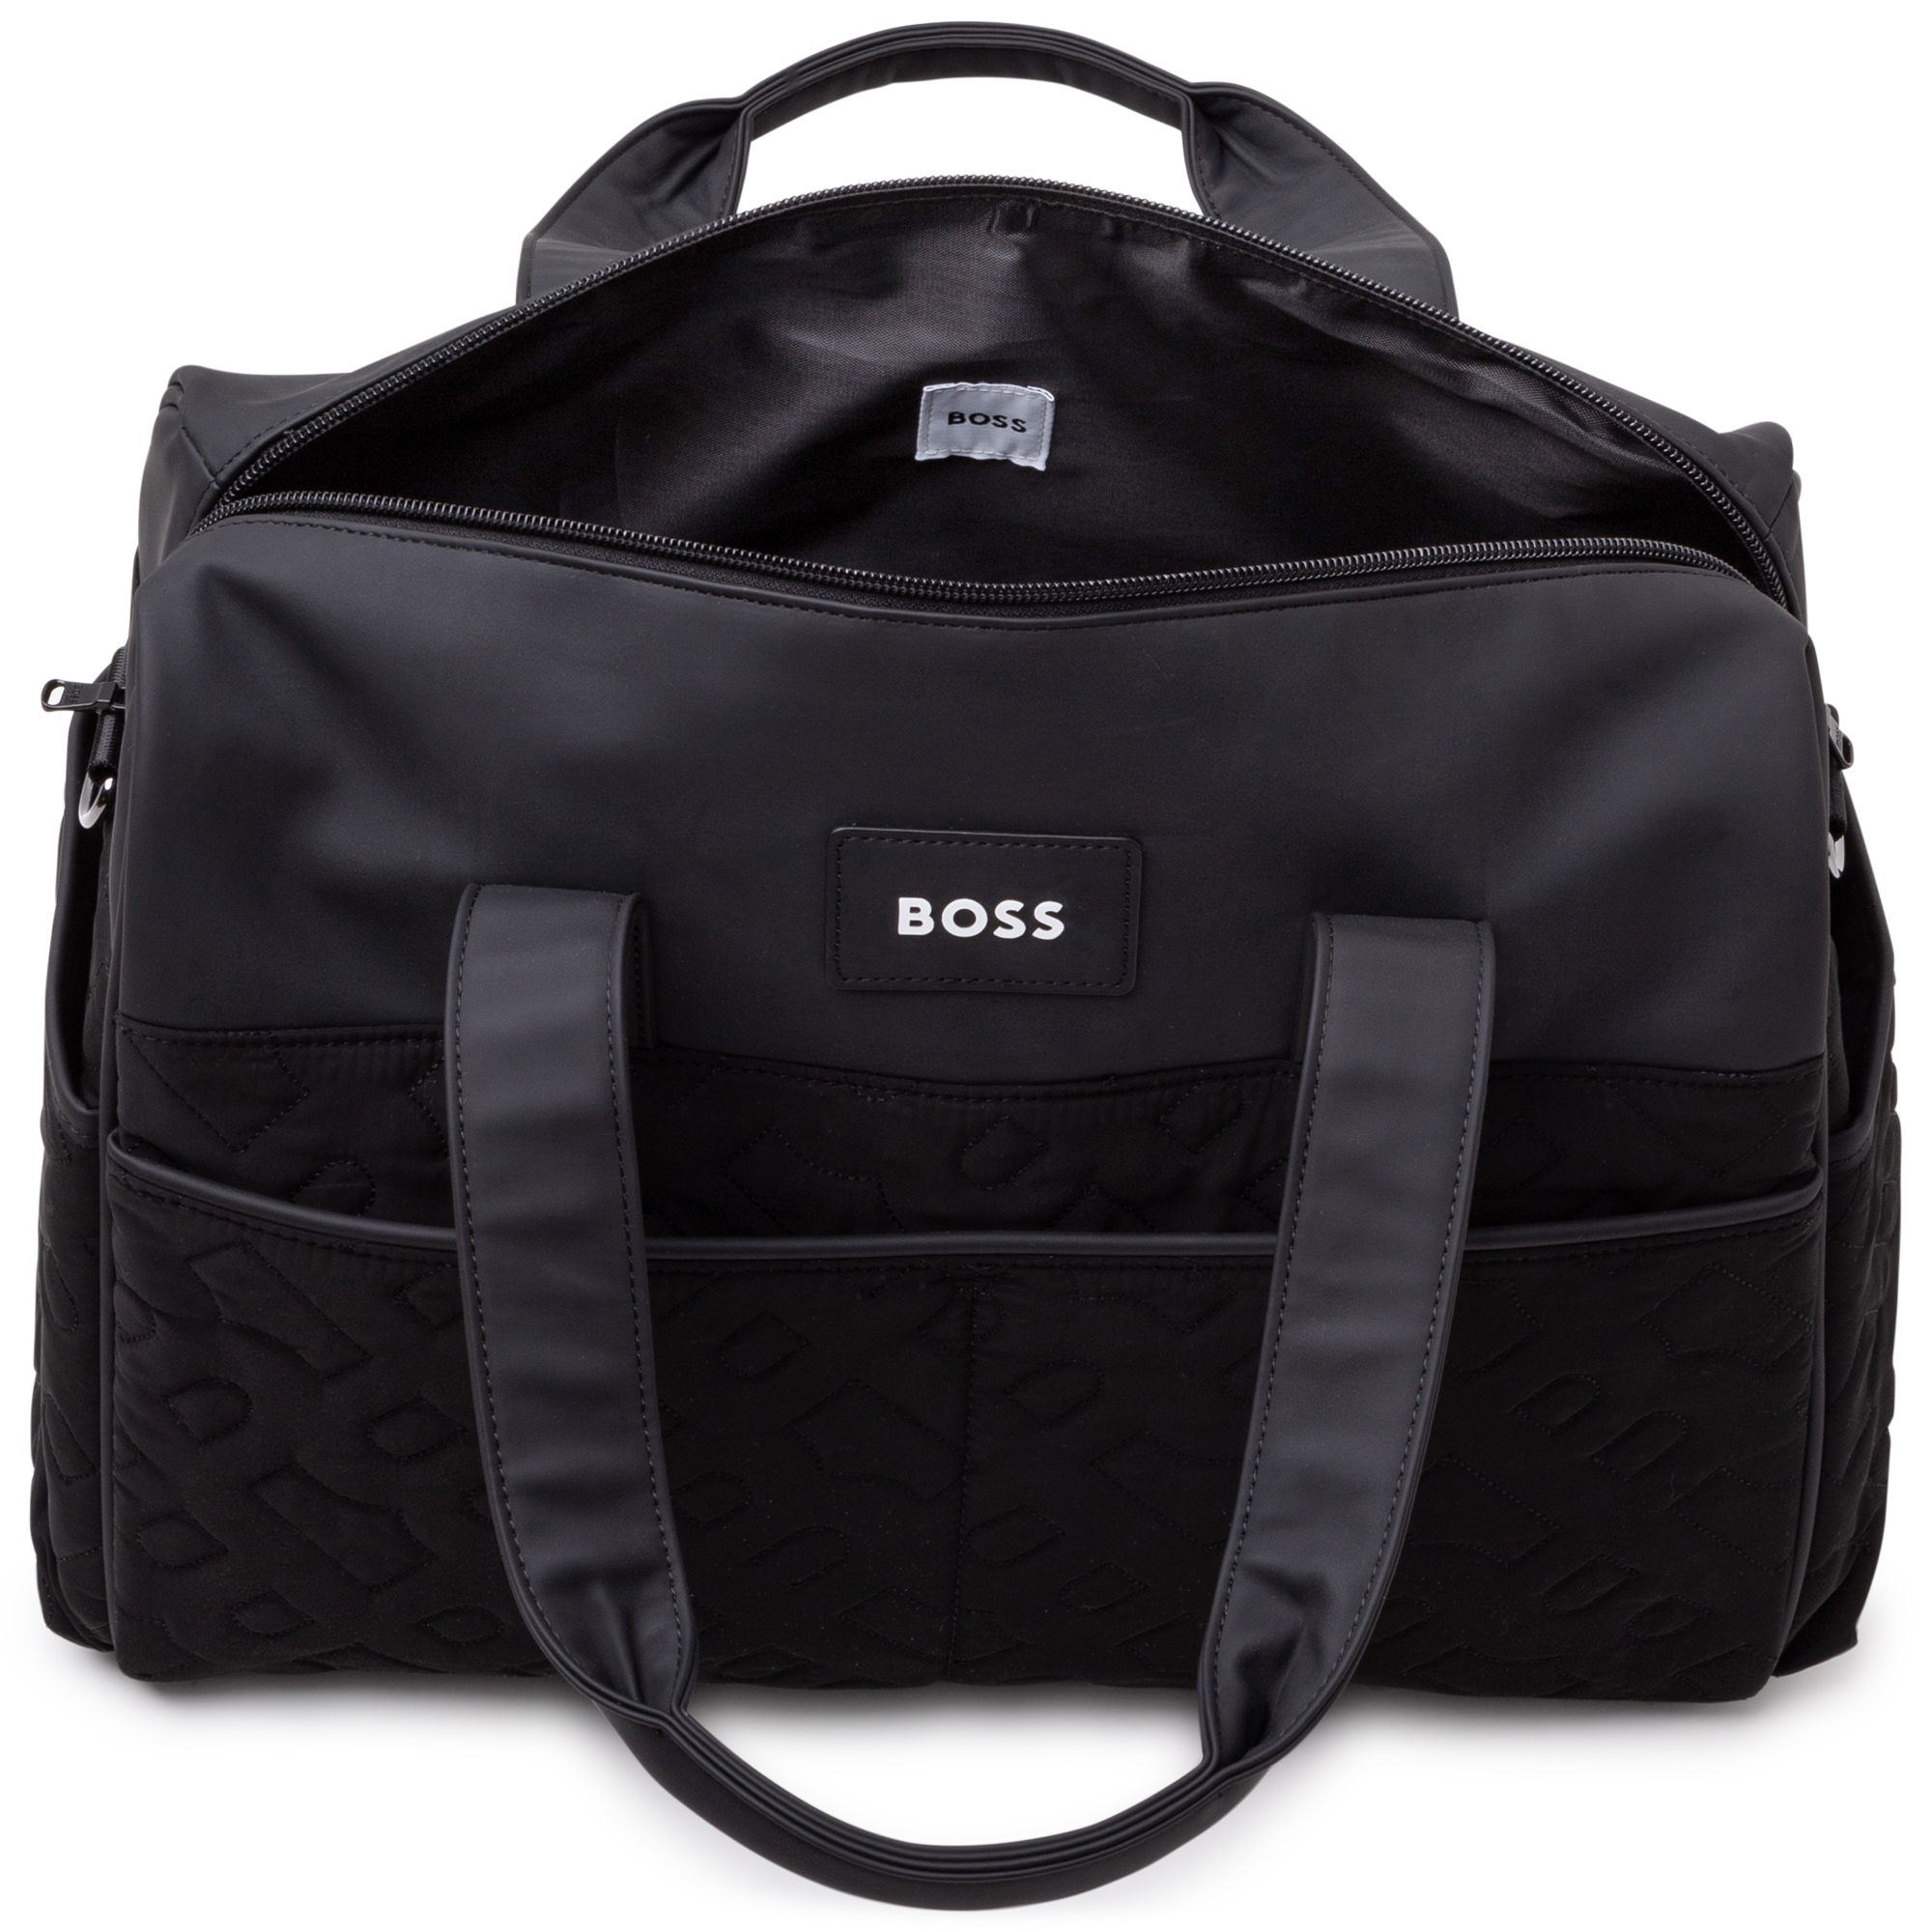 Coated changing bag BOSS for UNISEX